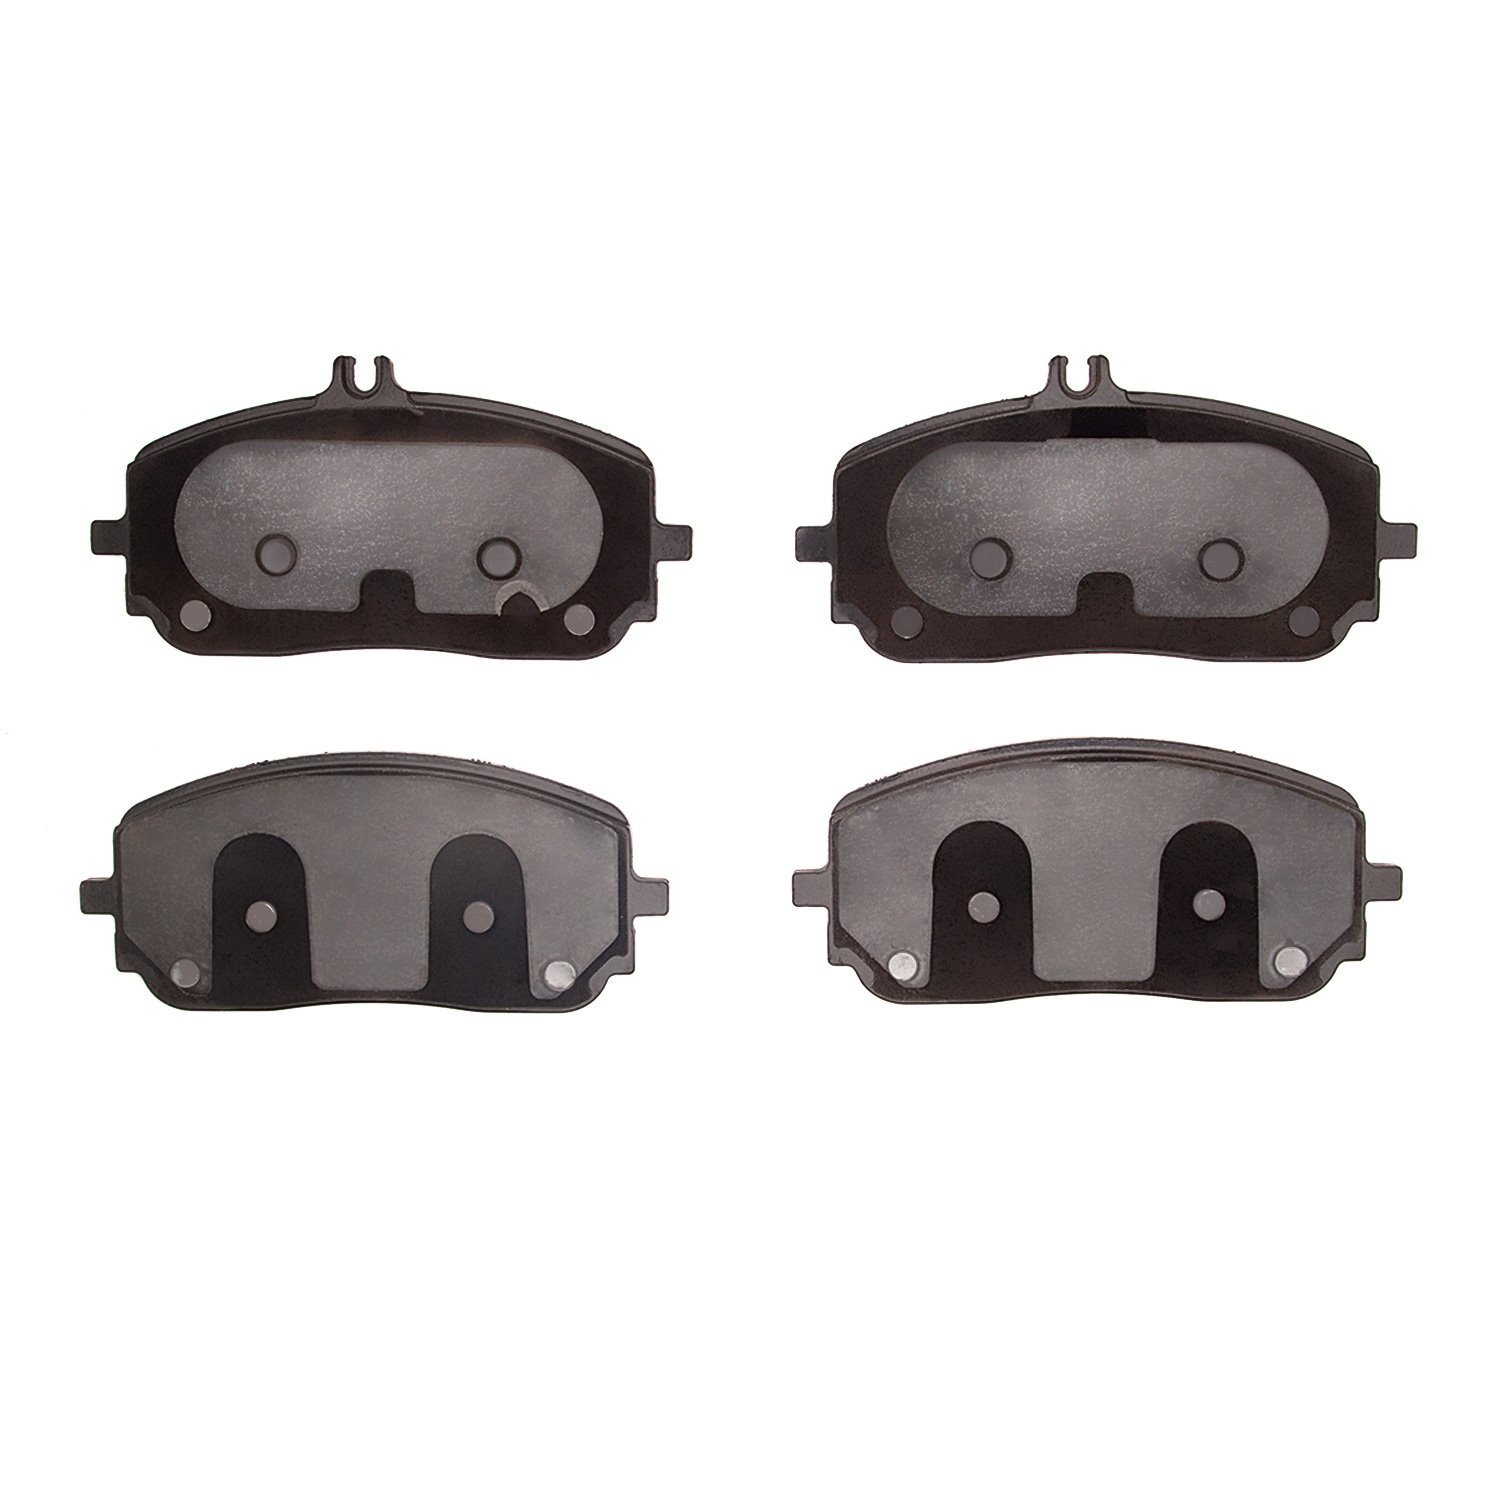 1310-2209-00 3000-Series Ceramic Brake Pads, Fits Select Mercedes-Benz, Position: Front